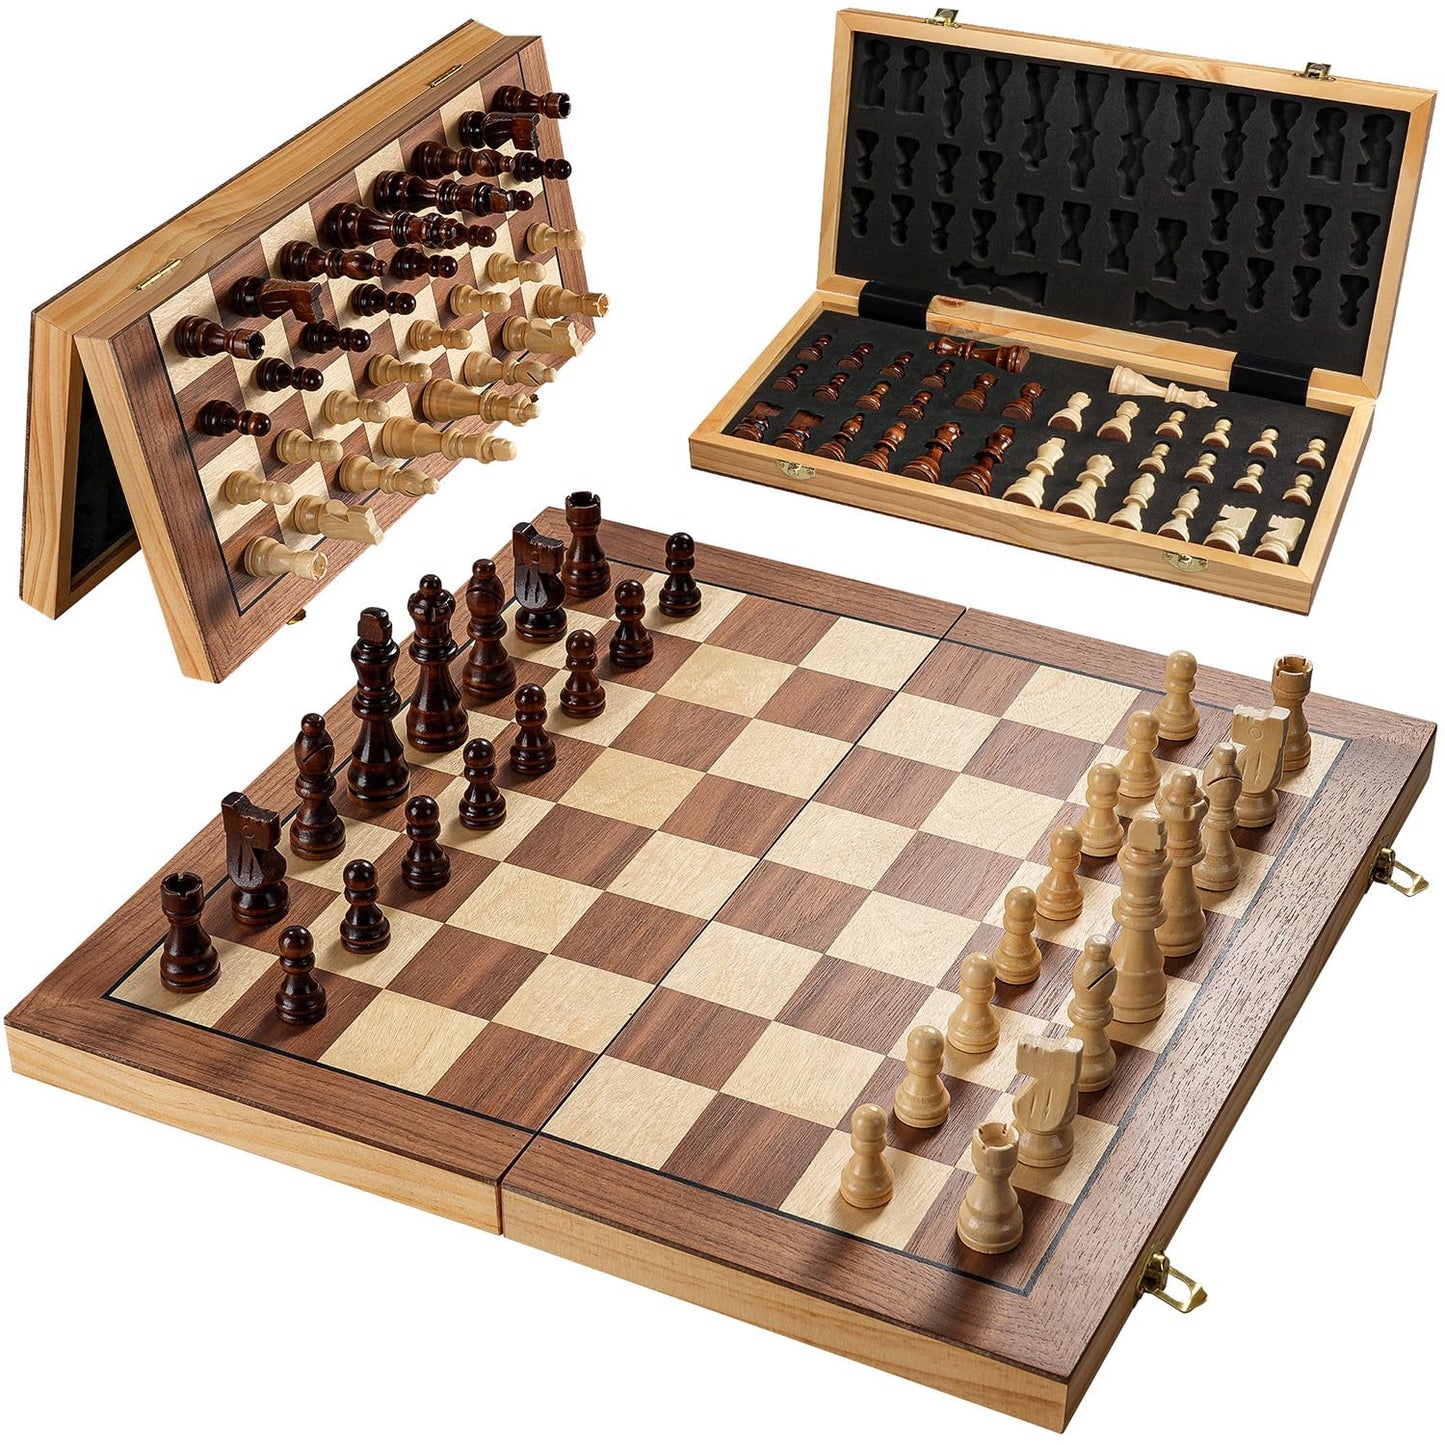 Magnetic Chess Board Set for Adults & Kids, 15" Wooden Folding Chess Boards, Handcrafted Portable Travel Chess Game with Pieces Storage Slots